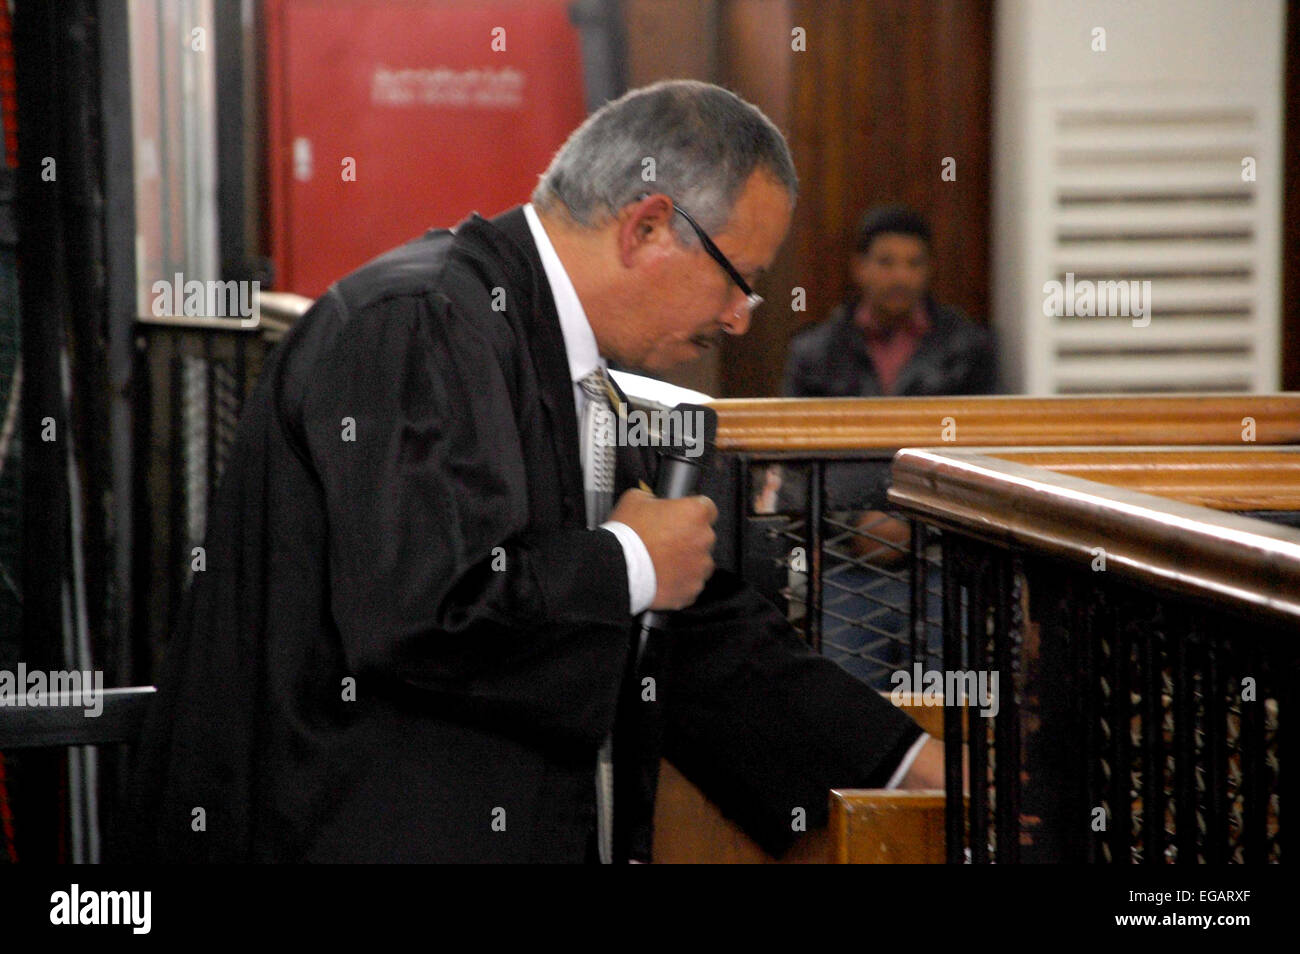 Cairo, Egypt. 21st Feb, 2015. A lawyer speaks to judges during the trial of suspects in the ''Rabaa Operation Room'' case, in Cairo on February 12, 2015. The prosecution accused the defendants of several charges relating to preparation of an operation room to guide the movement of the Muslim Brotherhood organization in order to confront the state and spread chaos in the country Rabaa and Al Nahda sit-in clearing, and also accused them of plotting to storm and burn police stations, private properties and churches © Stringer/APA Images/ZUMA Wire/Alamy Live News Stock Photo